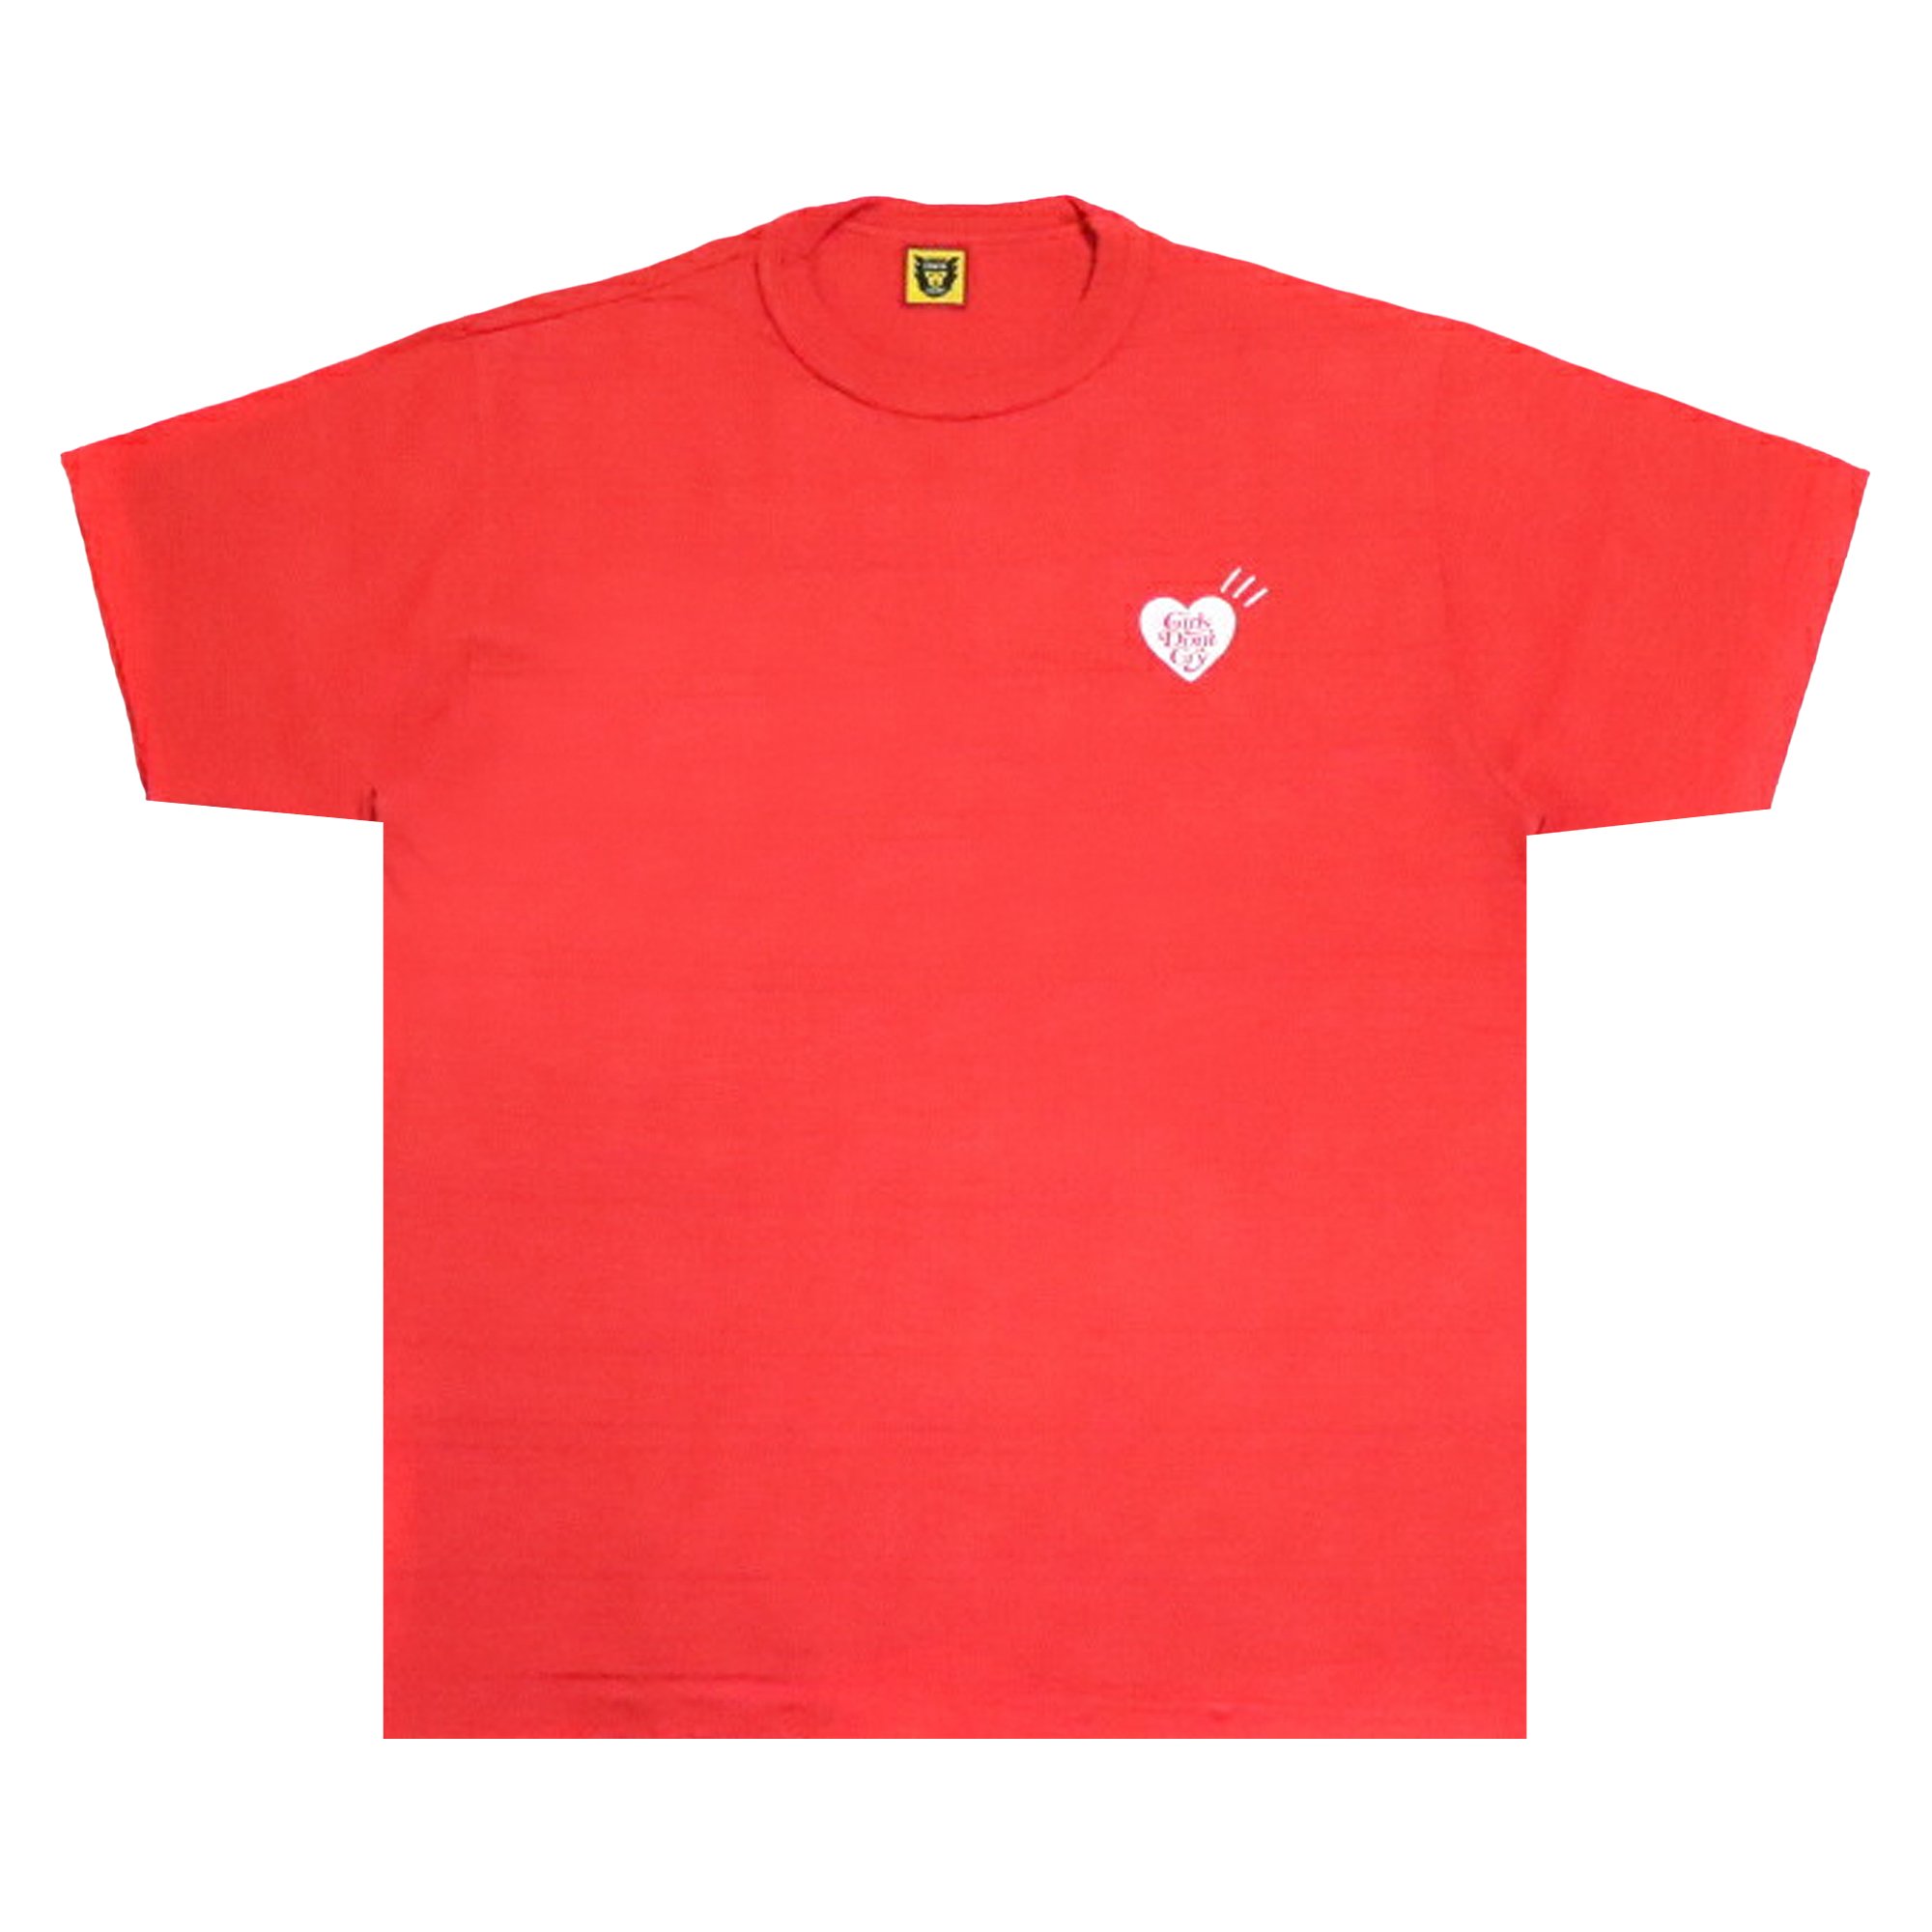 Buy Girls Don't Cry x Human Made T-Shirt 2 'Red' - 2109 1SS190103HMT2 RED |  GOAT